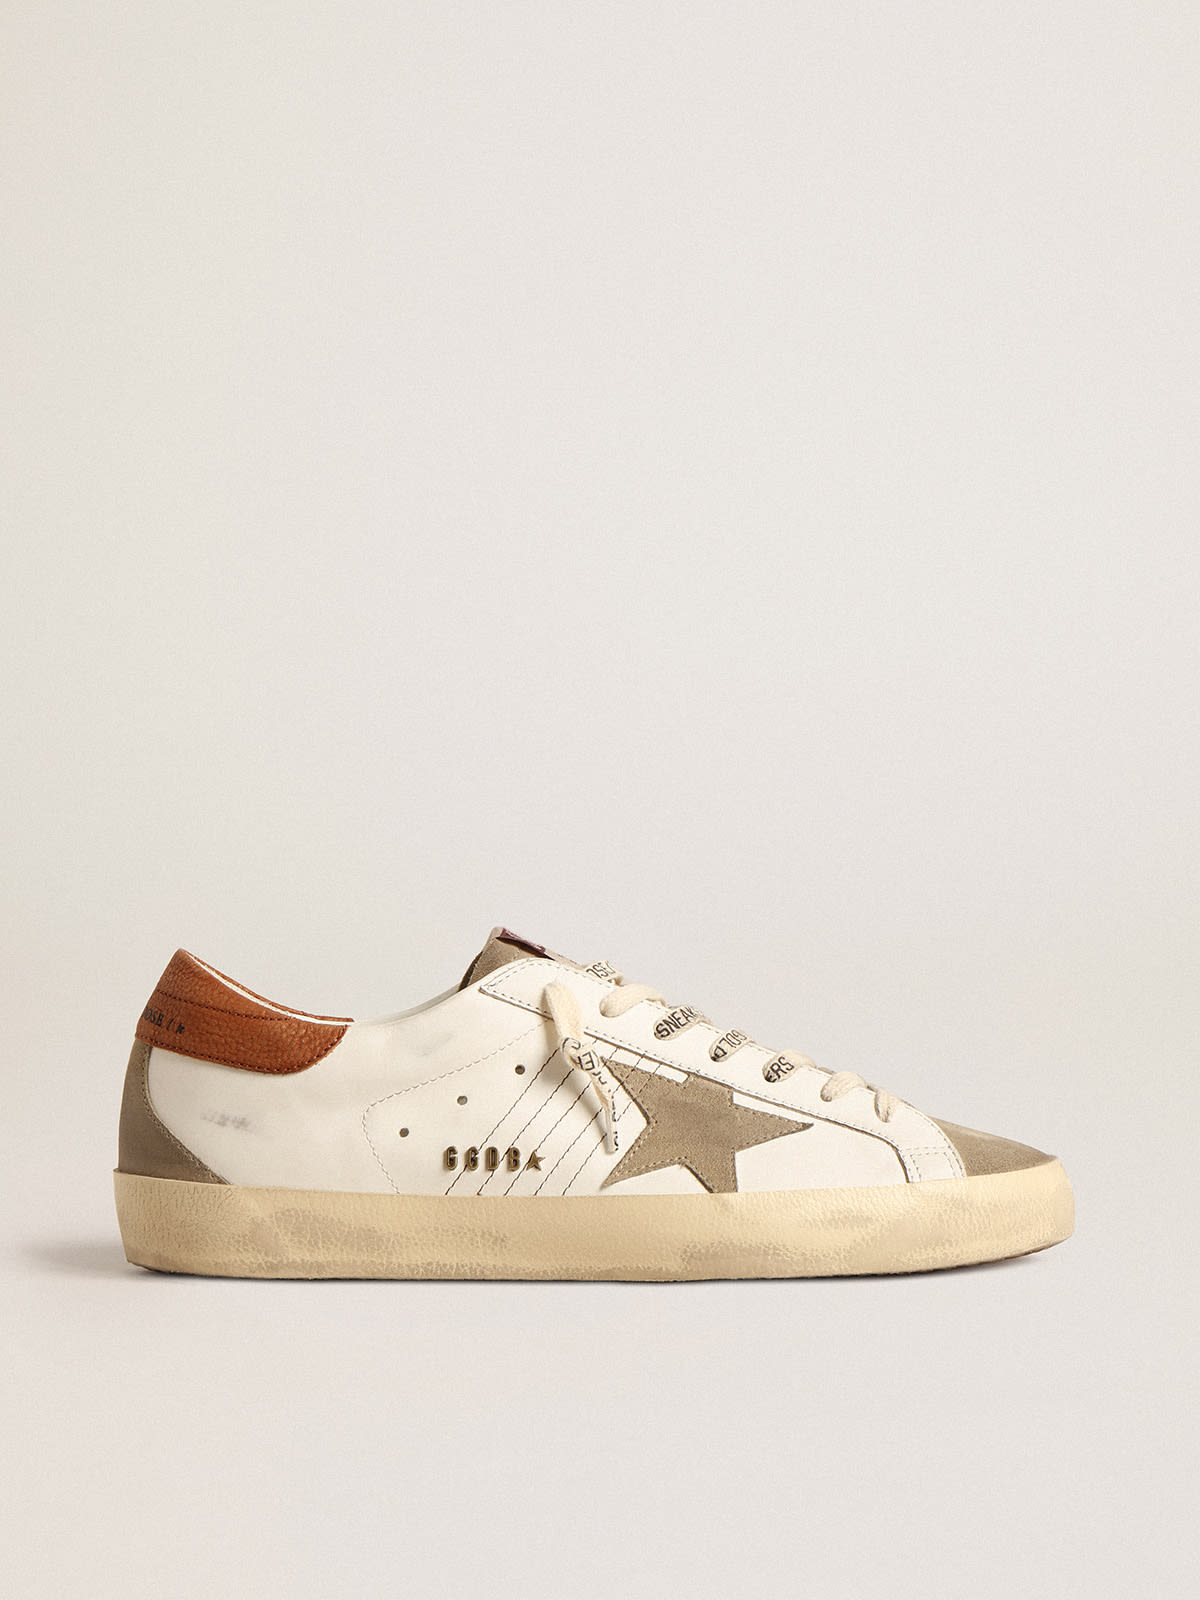 Golden Goose - Super-Star with suede star and brown leather heel tab in 